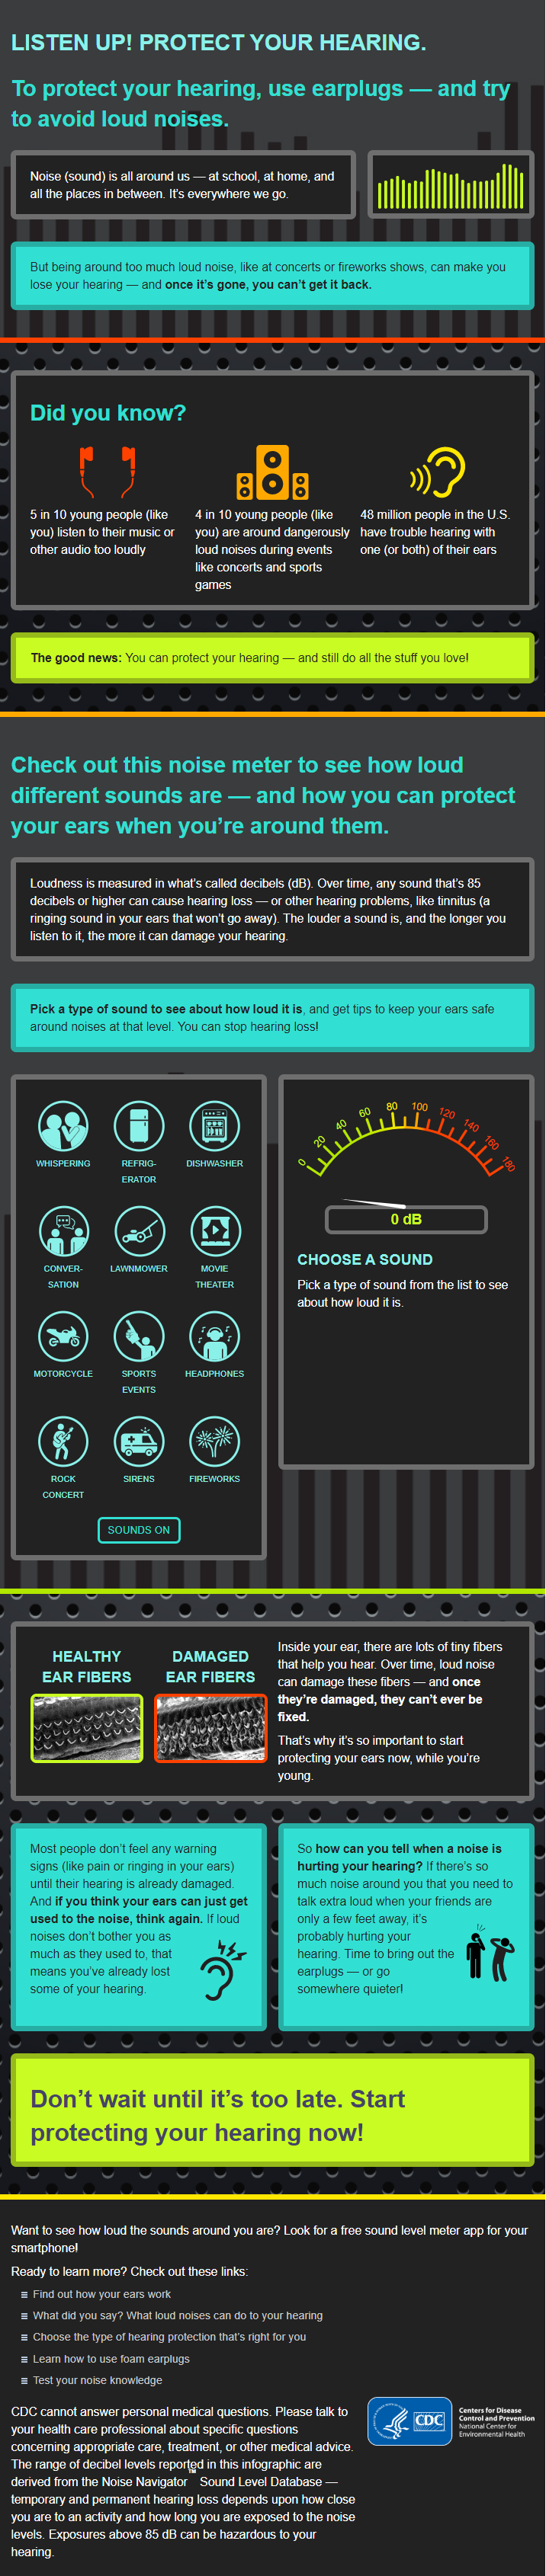 An infographic with icons of earphones, a stereo, and an ear used to represent various statistics. Additional icons are used to signify different types of sounds, such as whispering, sports events, and fireworks. A meter from 0 to 180 is used to represent the decibel level of each sound.